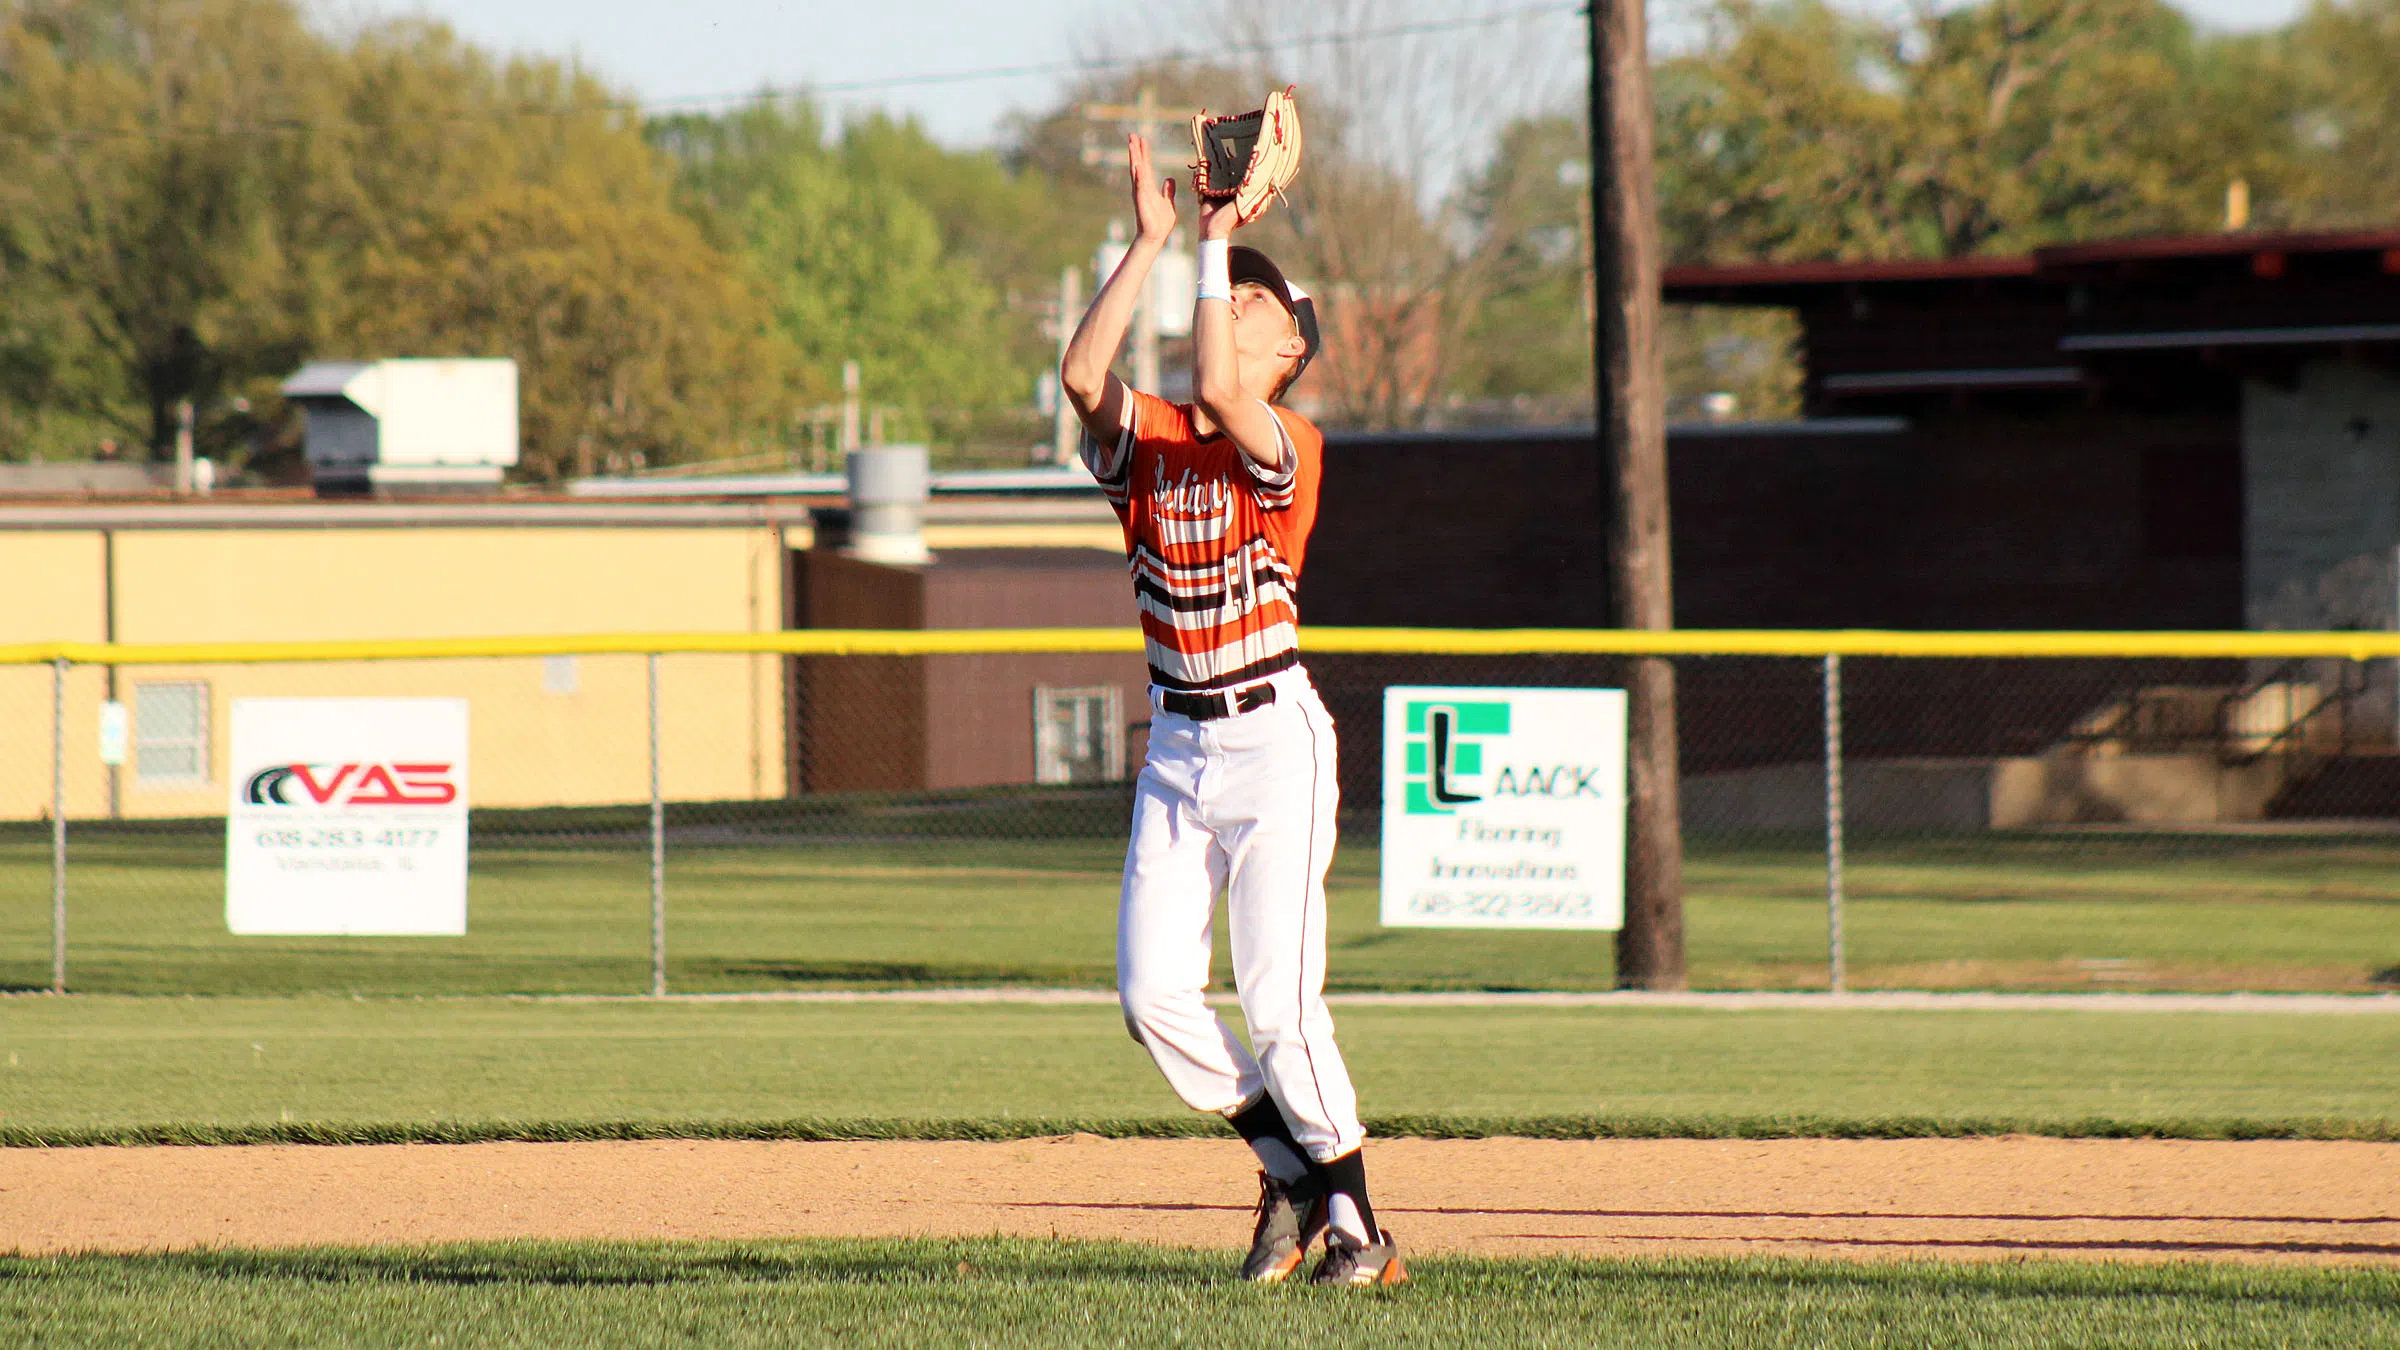 Early Runs Get Altamont 3-1 Win Over North Clay